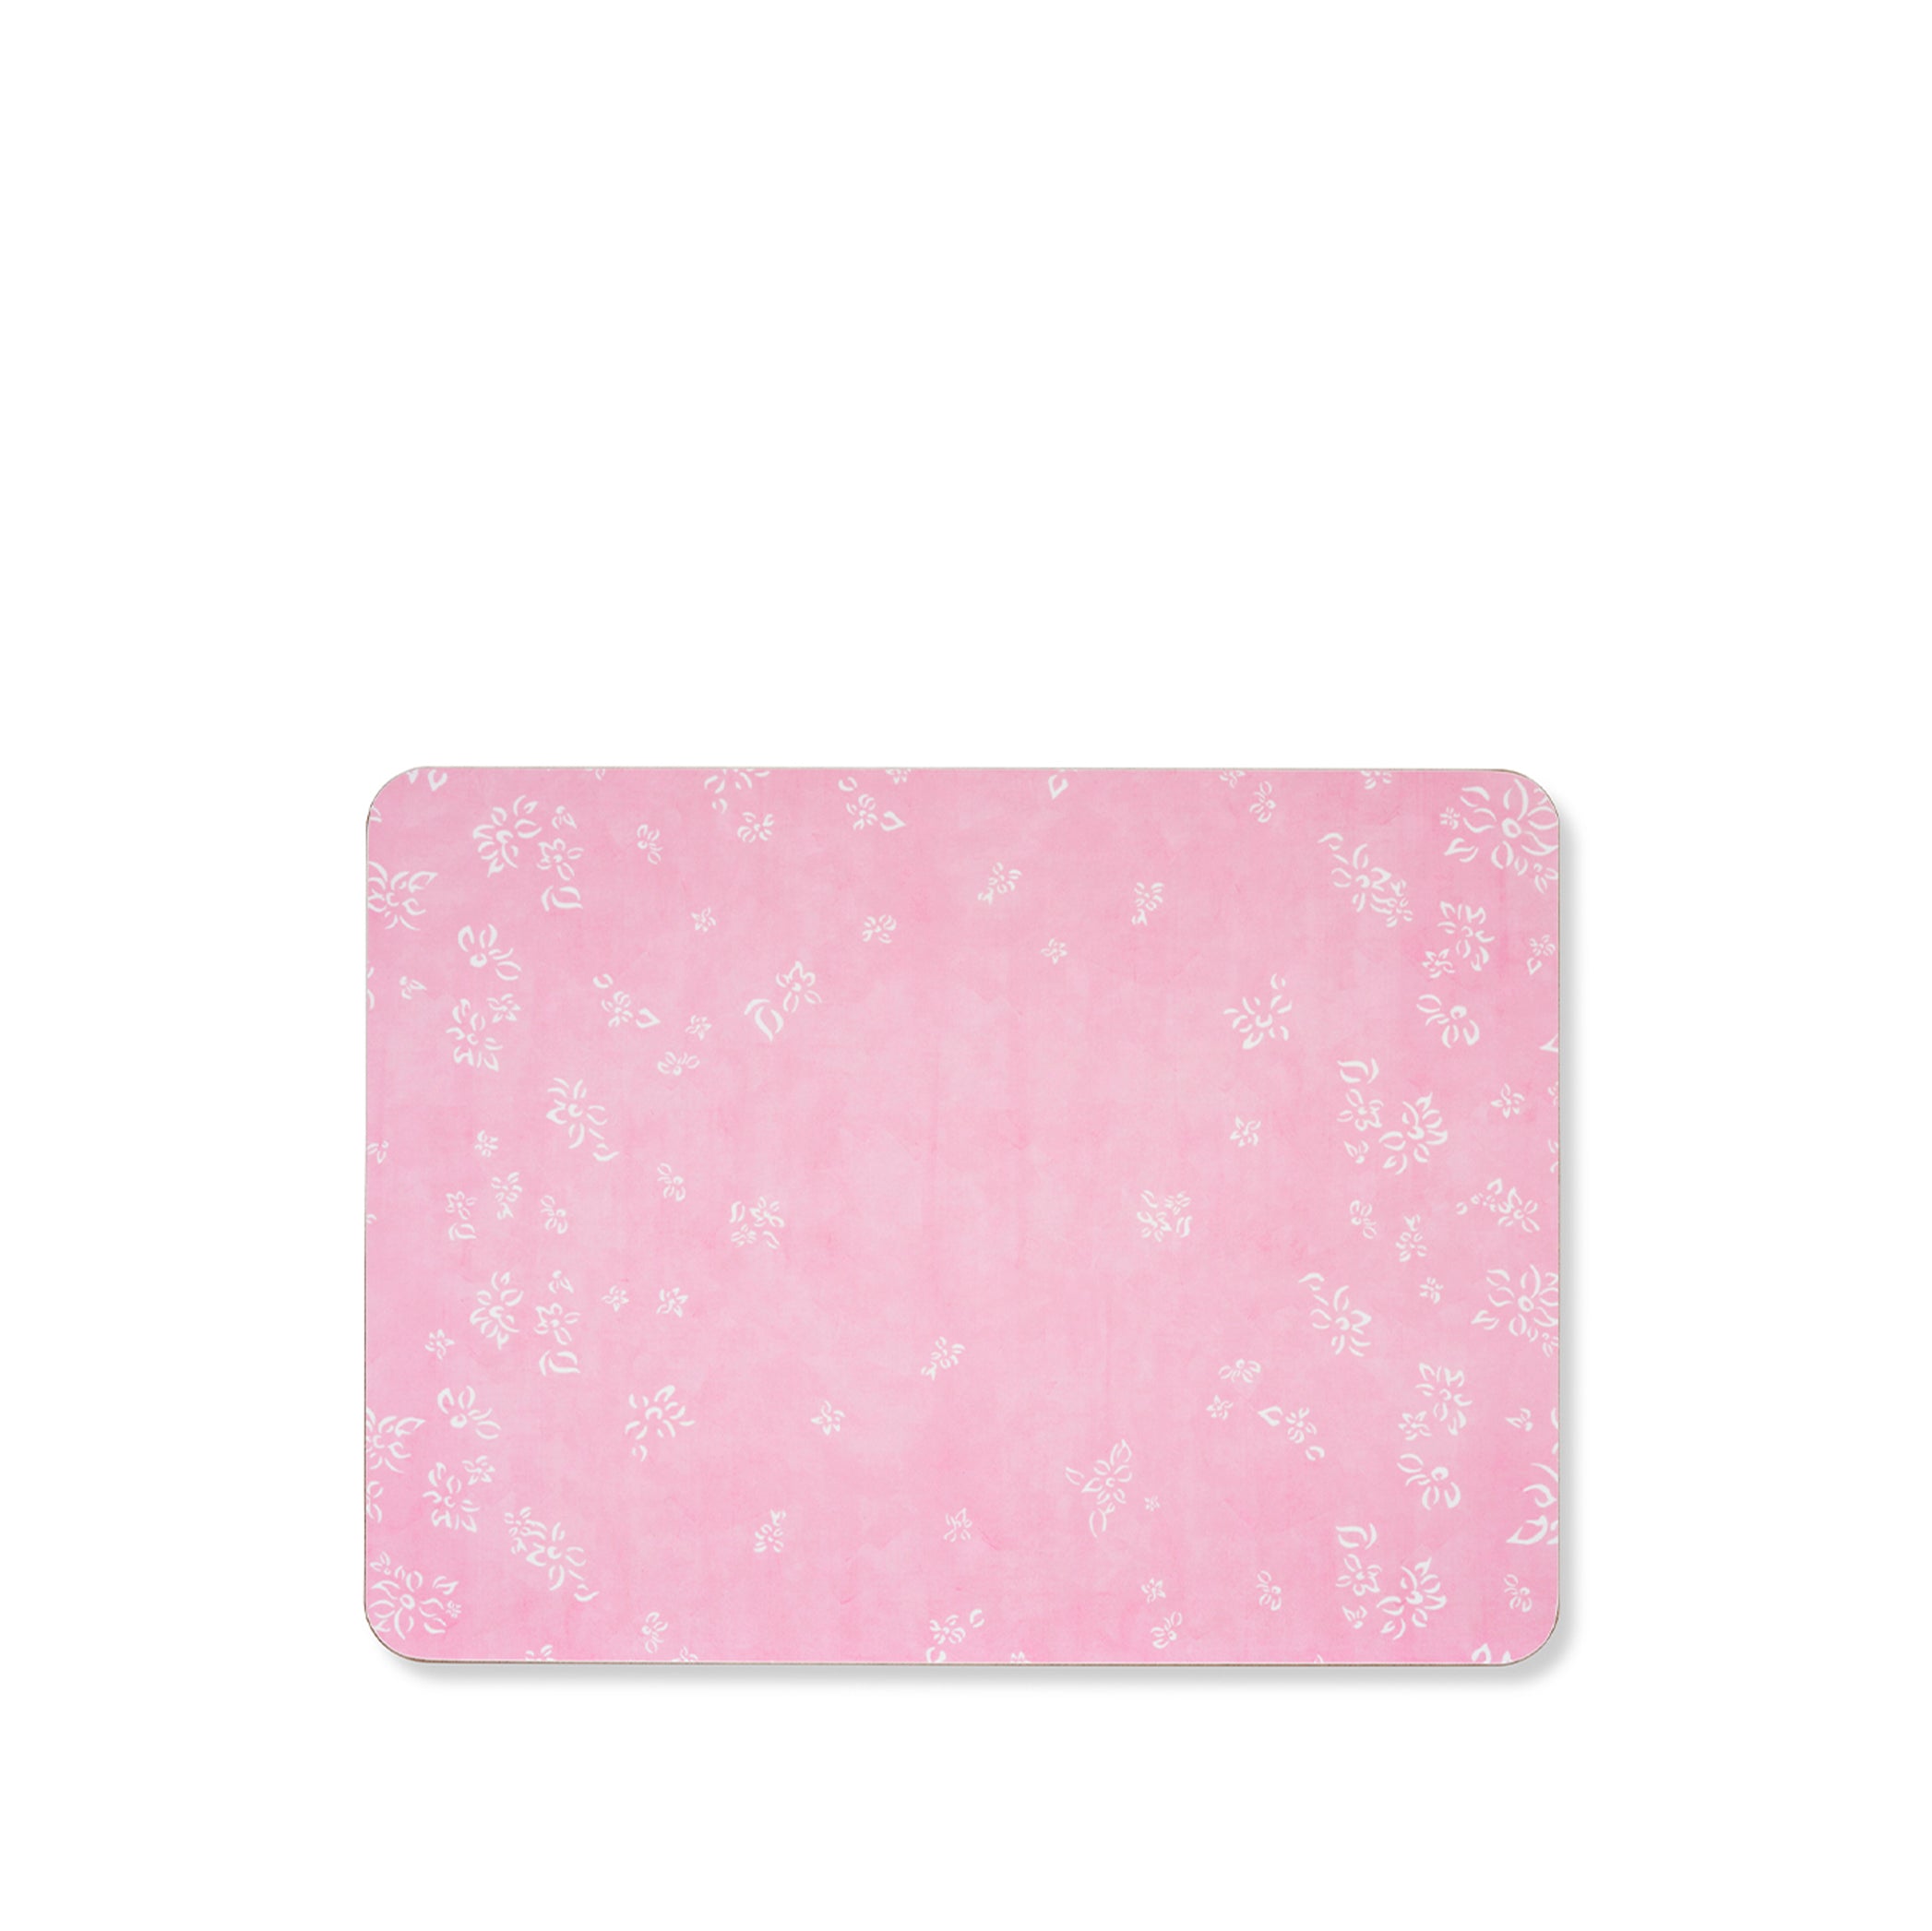 Falling Flower Cork-Backed Placemat in Pale Pink